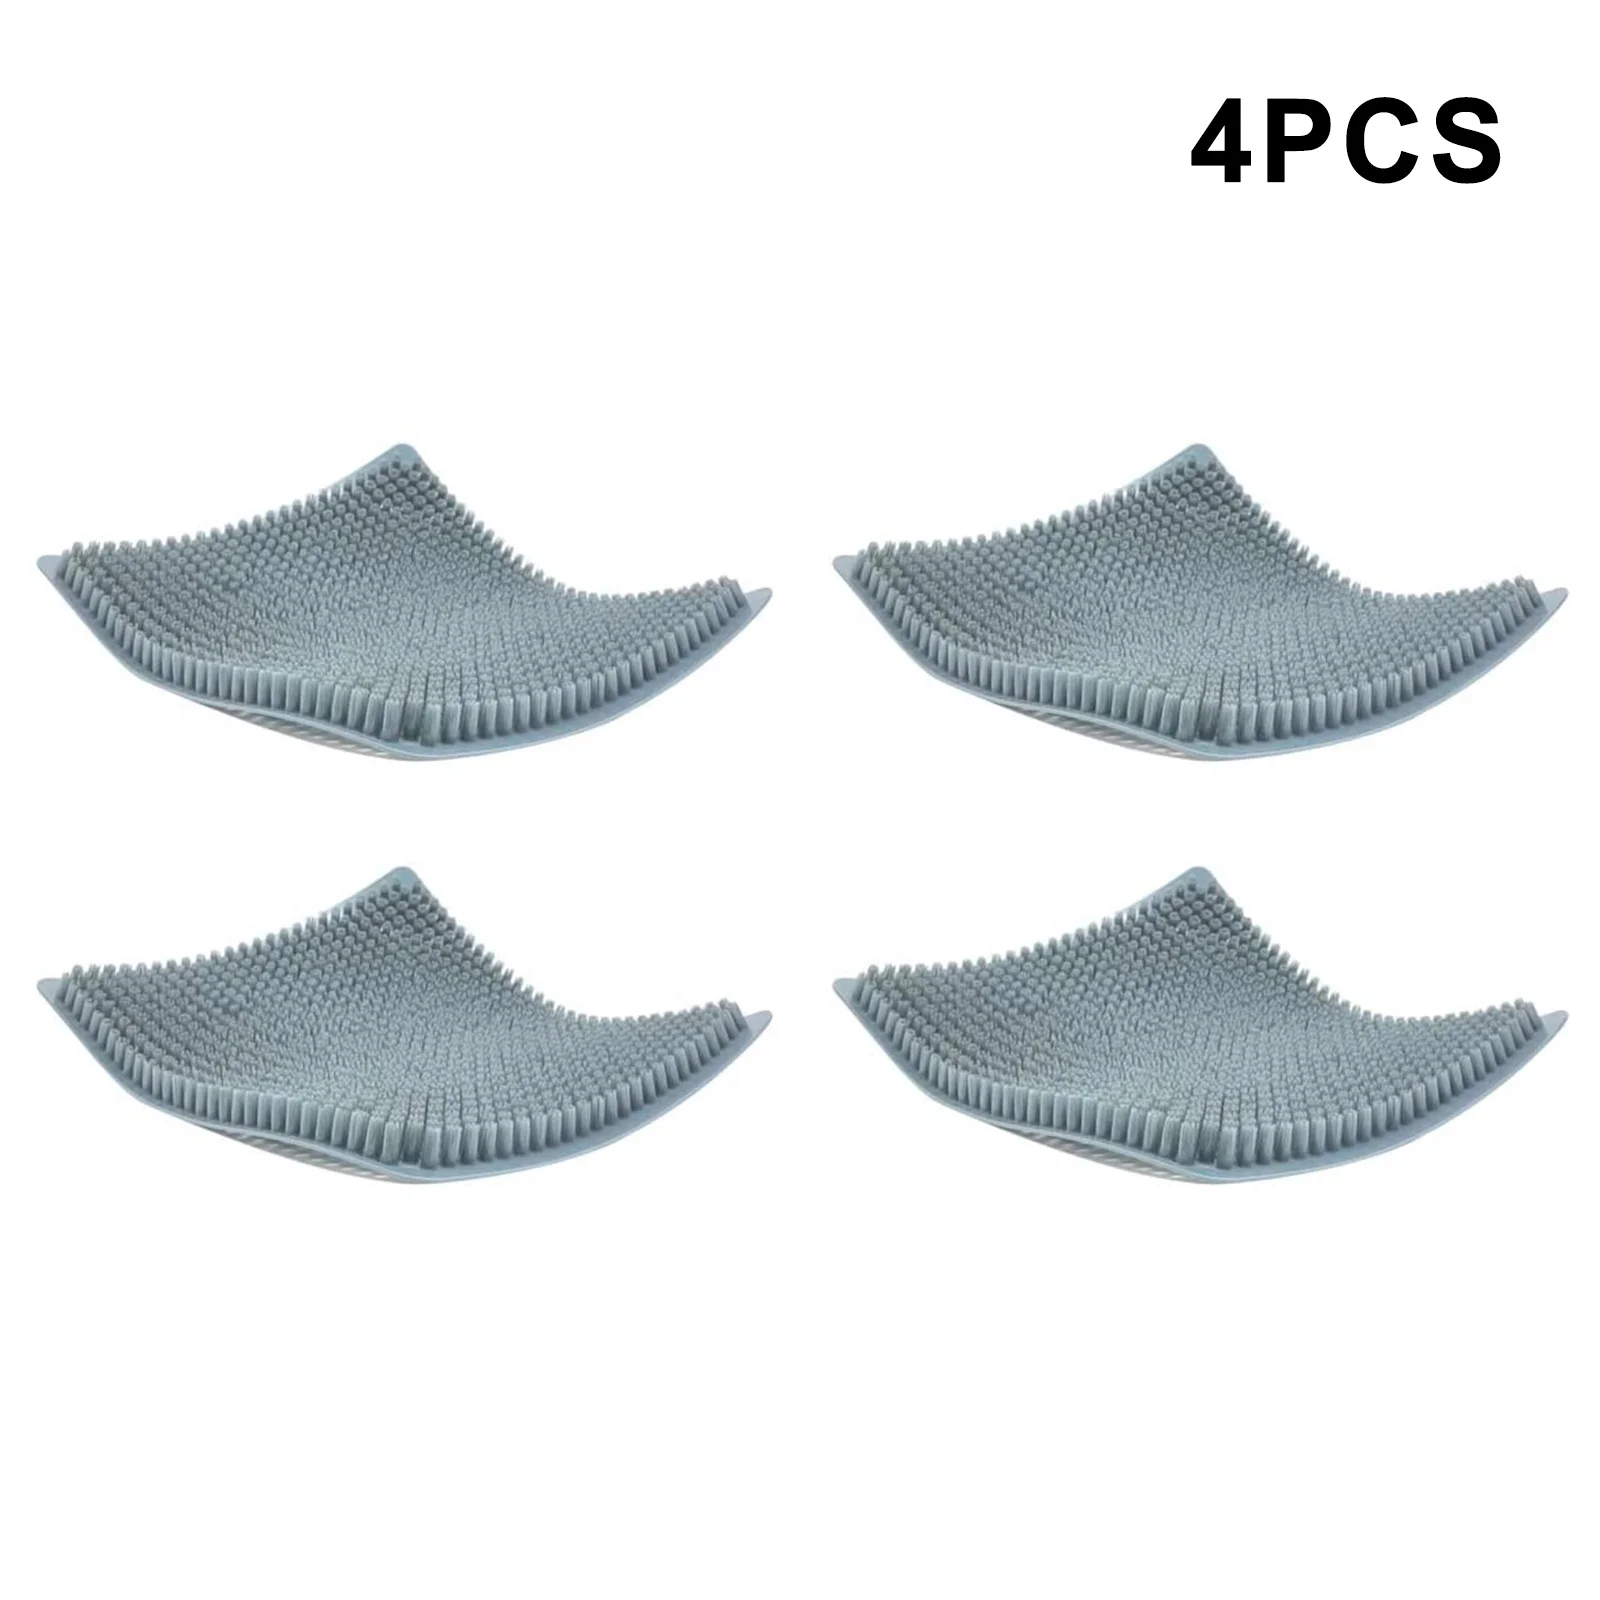 4PCS Washable Nesting Box Pads For Chicken Poultry Bottom For Chicken COOP Hen House Poultry NEST Straw Mat 12 x 13.8 Inches